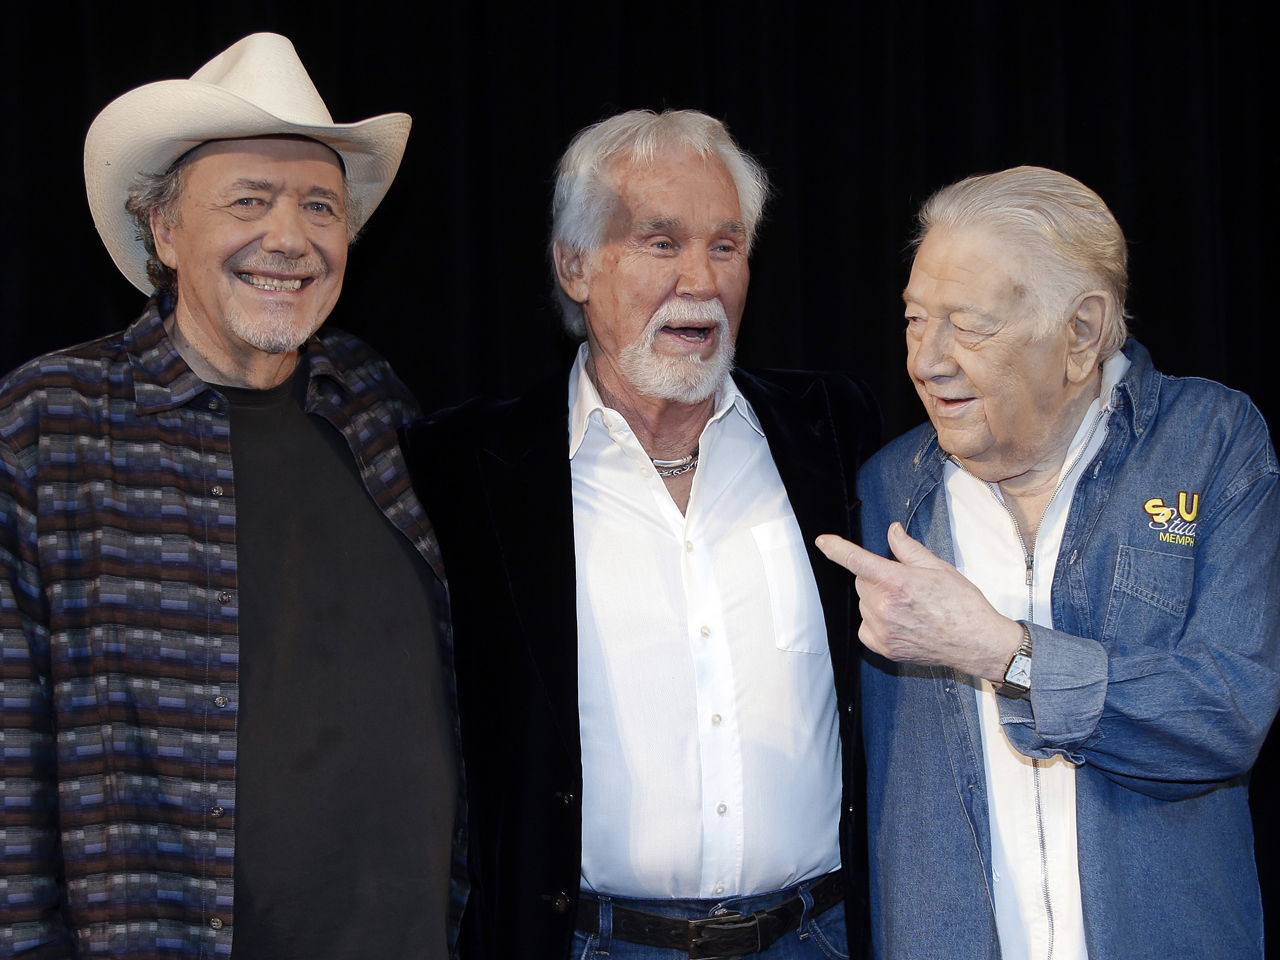 New Country Music Hall of Fame inductees announced CBS News